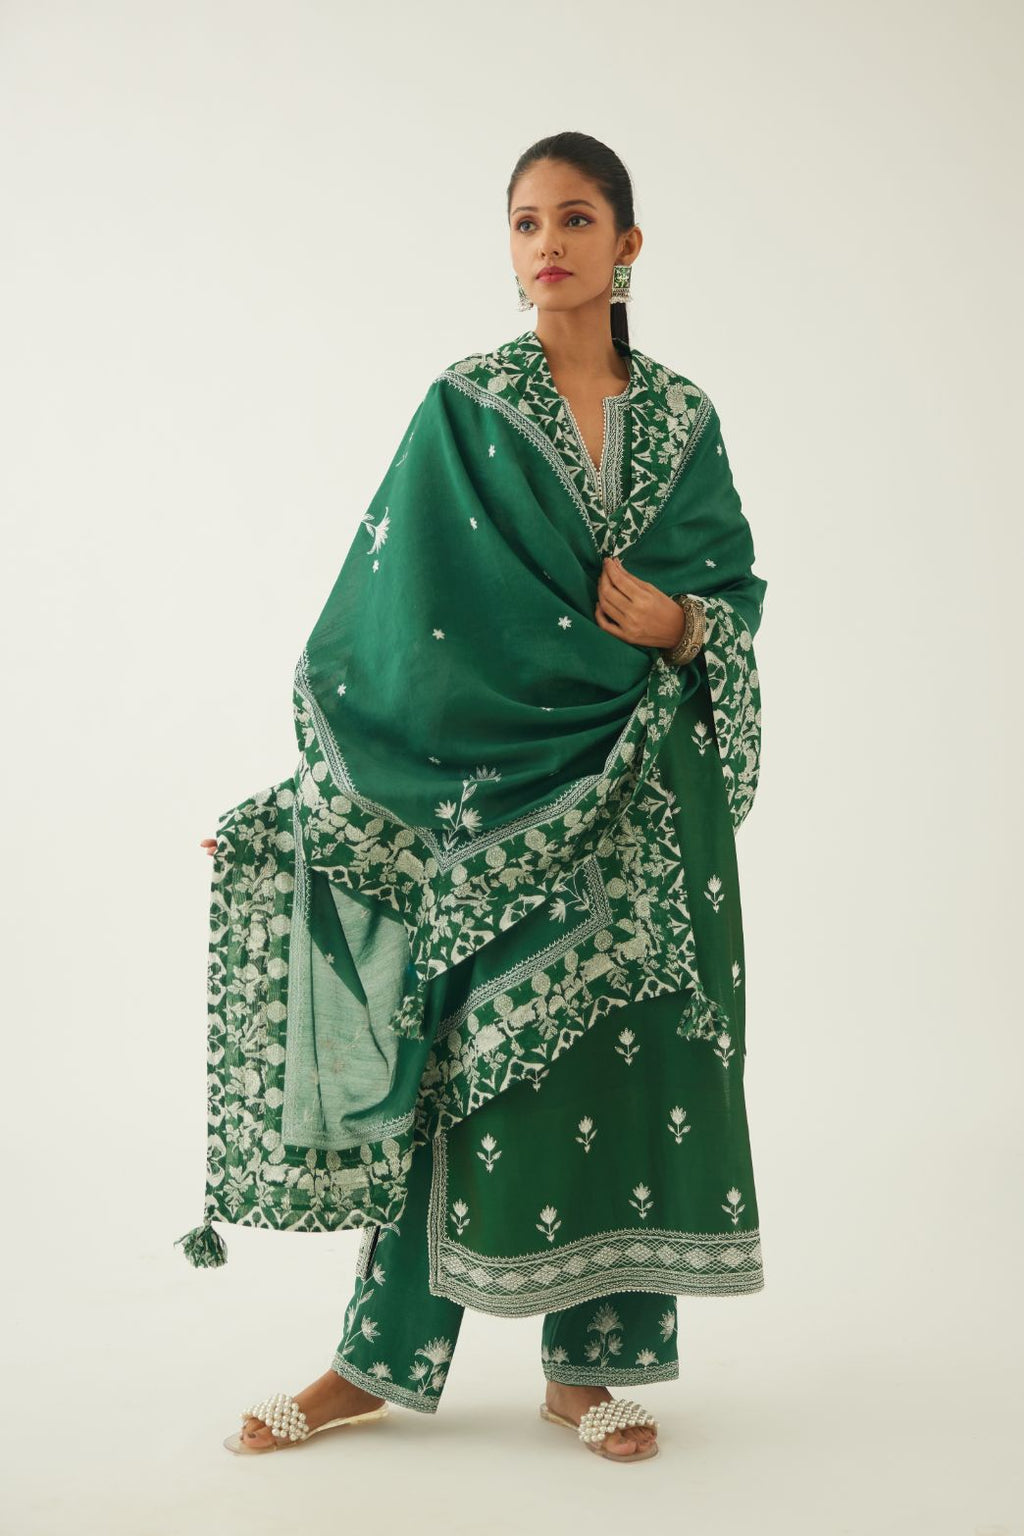 Green silk chanderi dupatta highlighted with all-over off white thread embroidery and mixed printed border running along all edges.